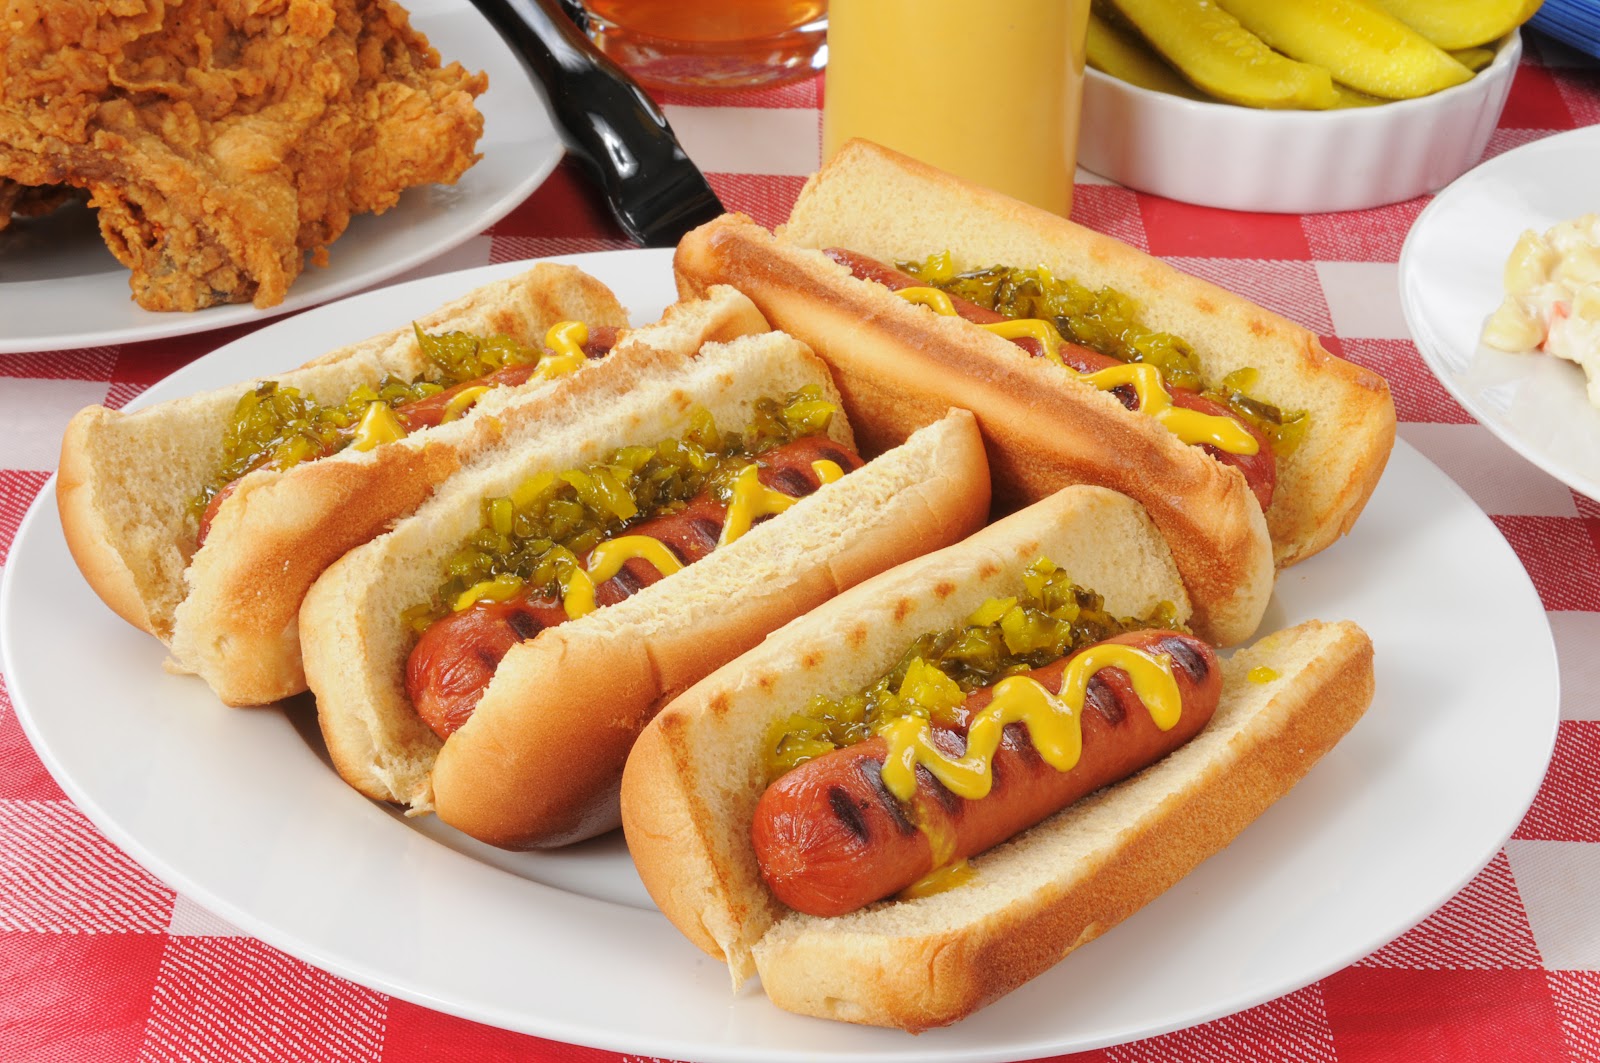 Picnic hot dogs